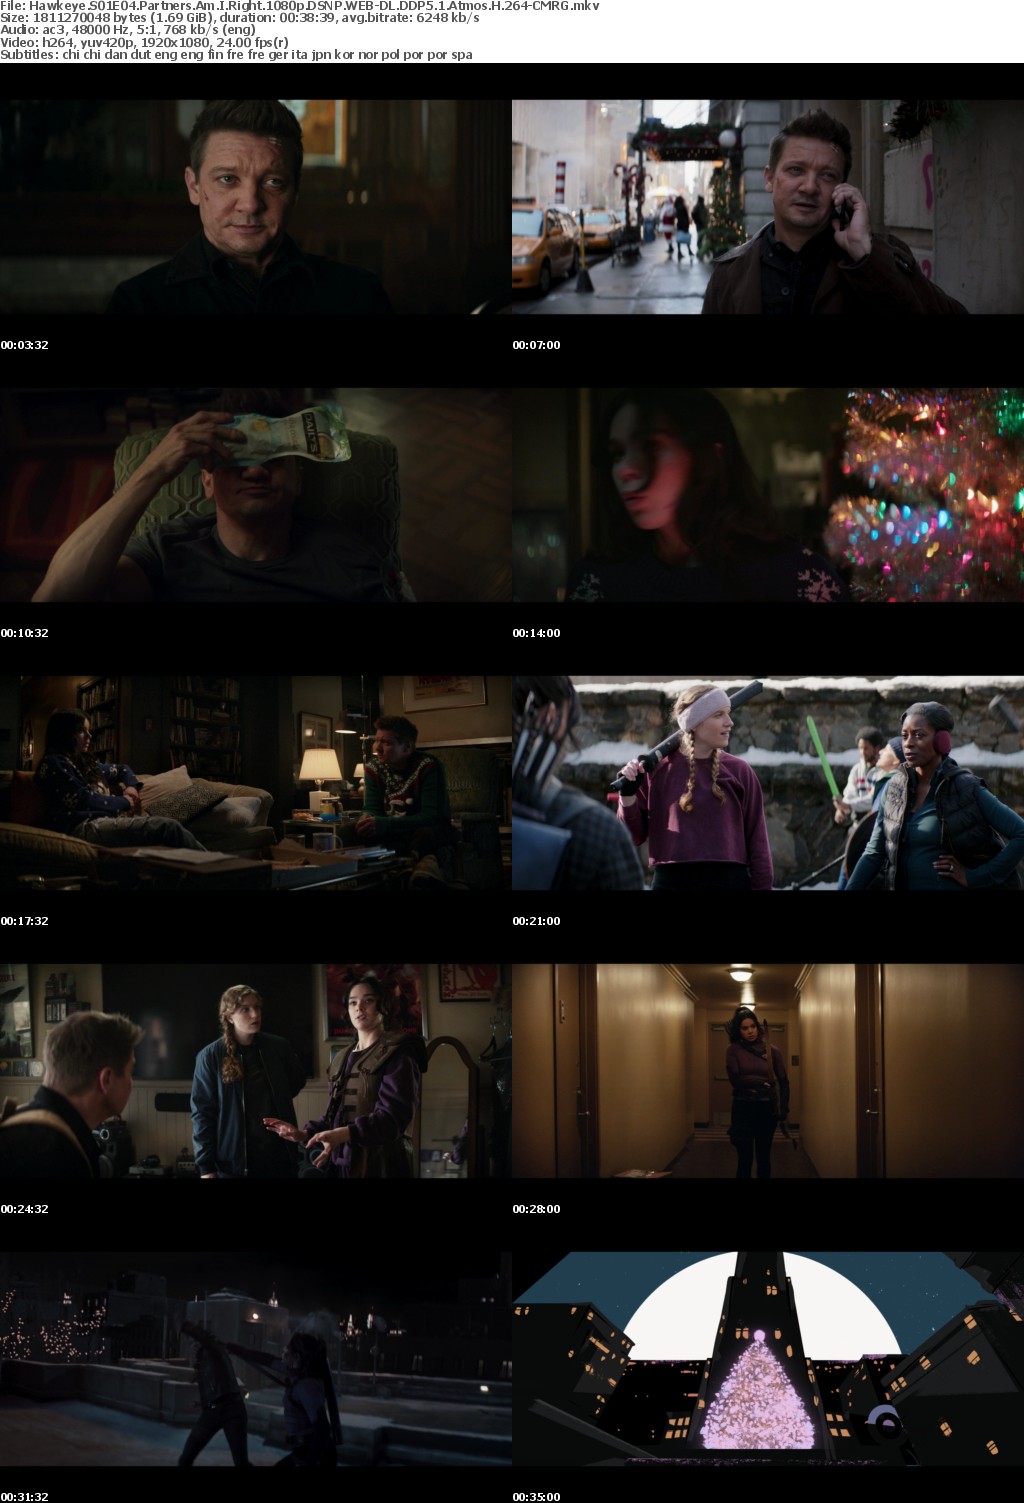 Hawkeye S01E04 Partners Am I Right 1080p DSNP WEB-DL DDP5 1 Atmos H 264-CMRG